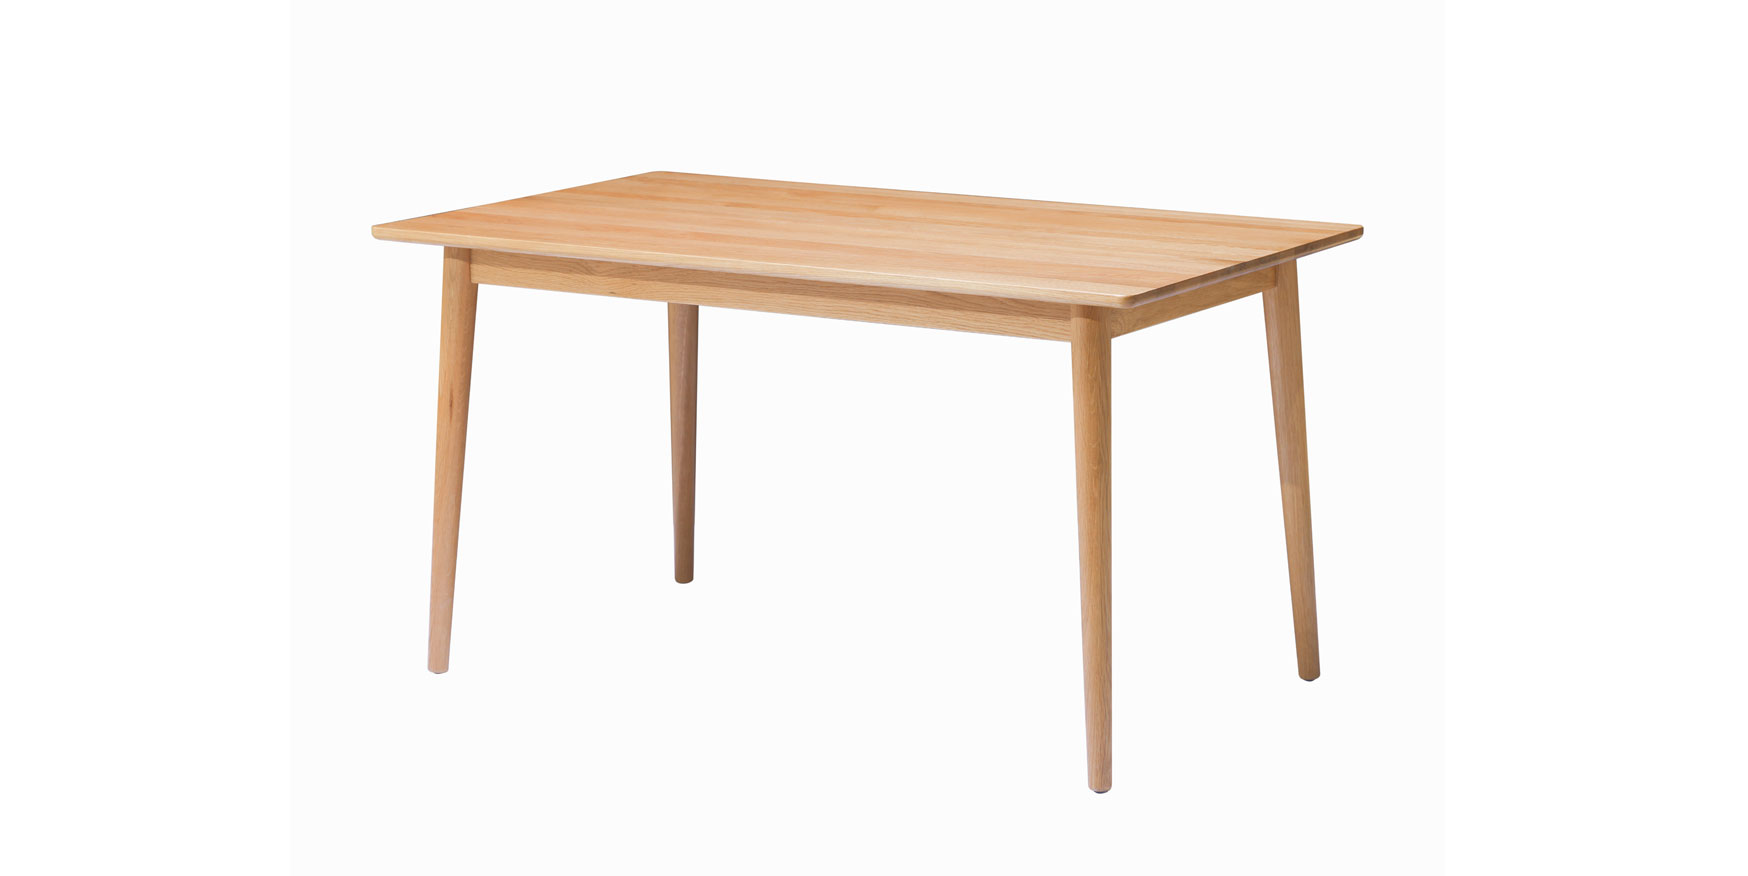 ply board dining table design
